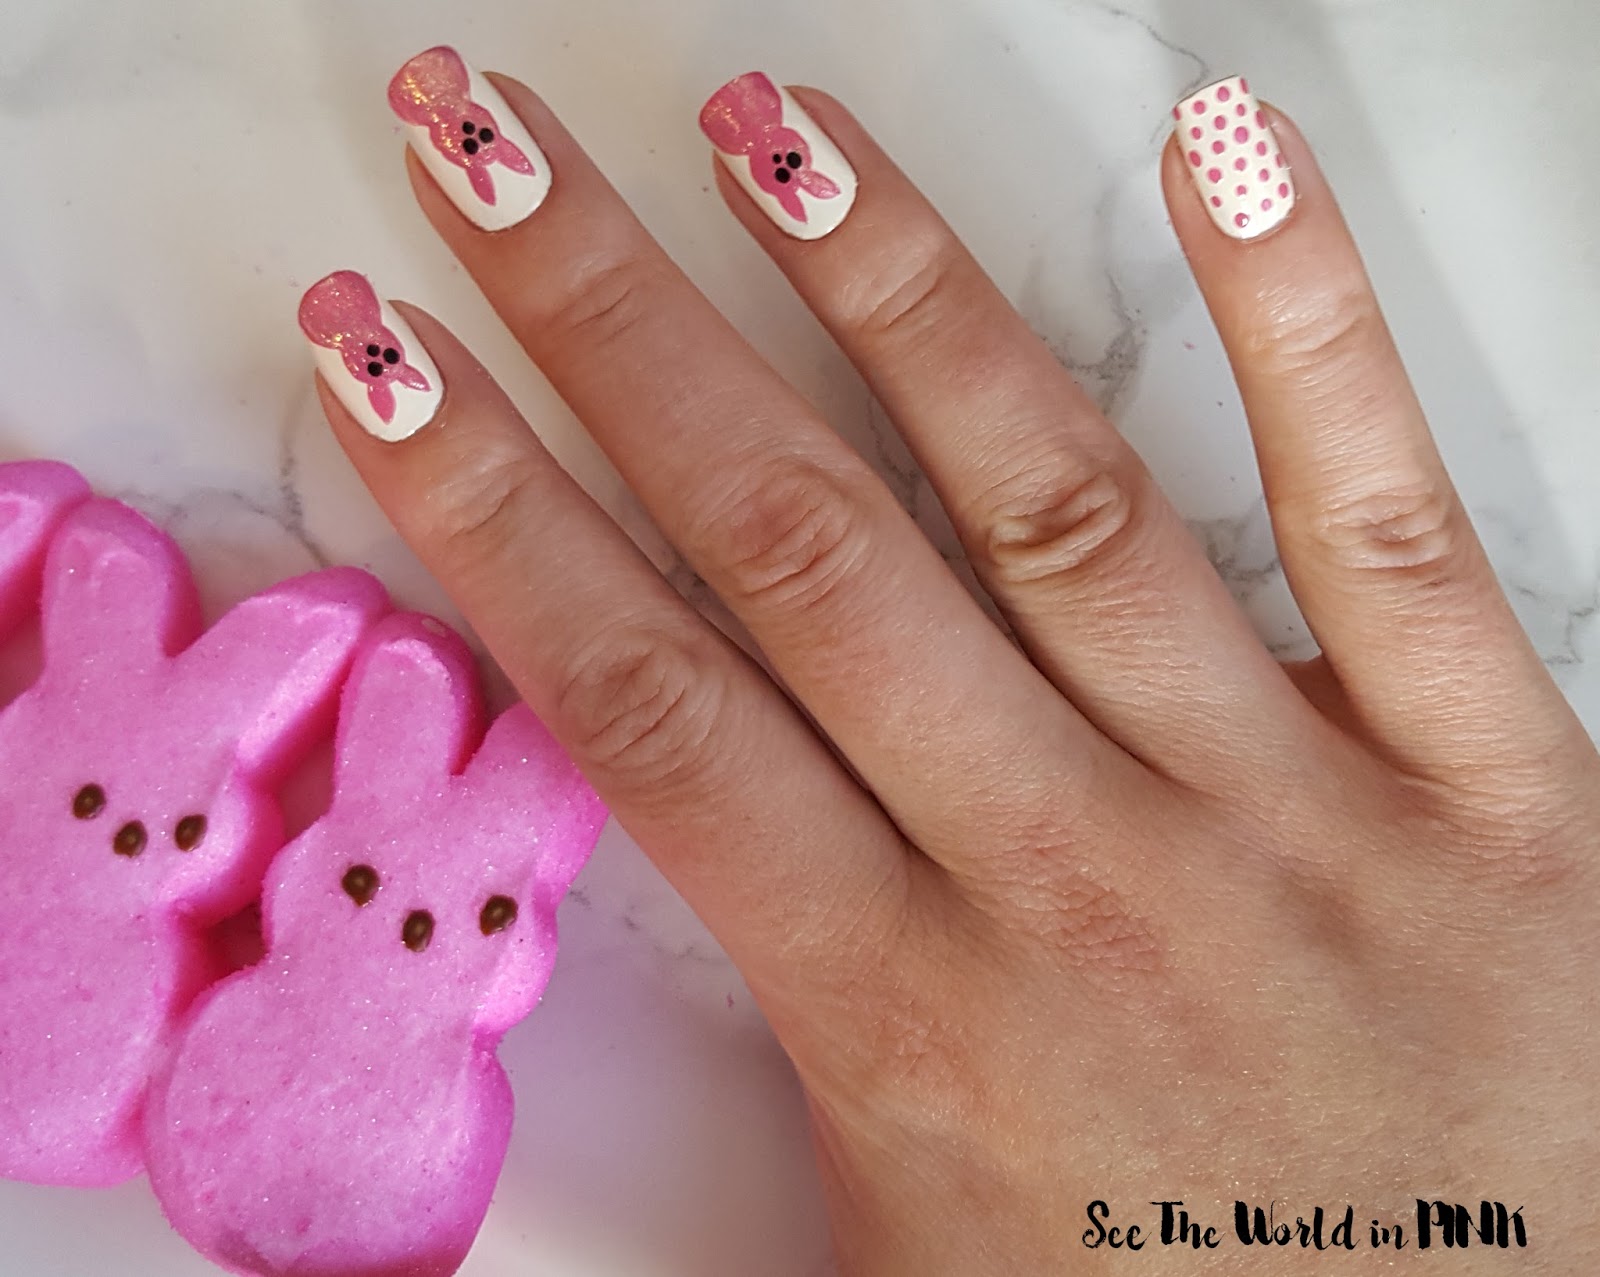 Bunny Nail Art - Works By Pro Nail Artists at theYou.com